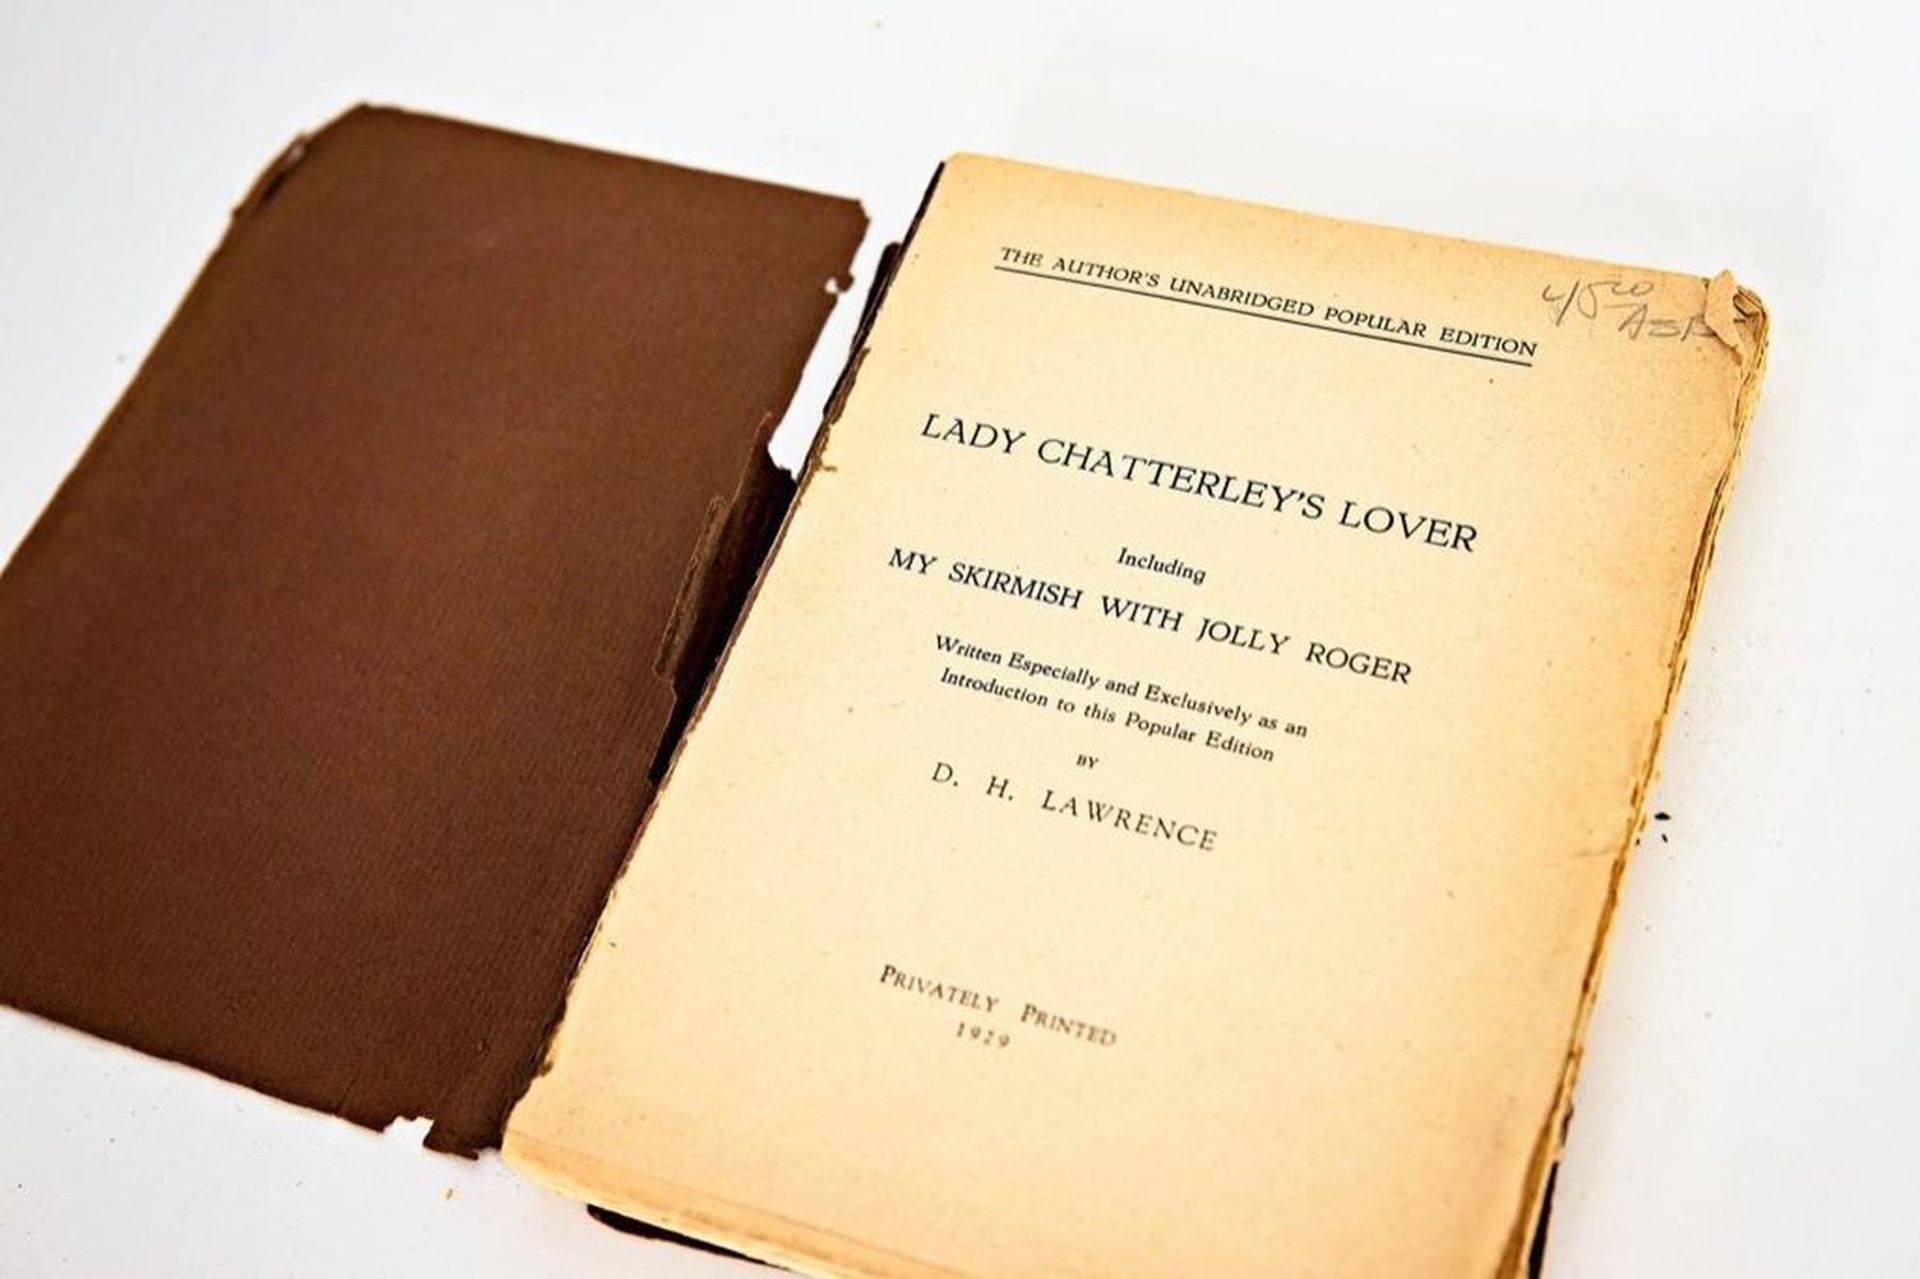 D. H. Lawrence, Lady Chatterley's Lover - Image 2 of 4